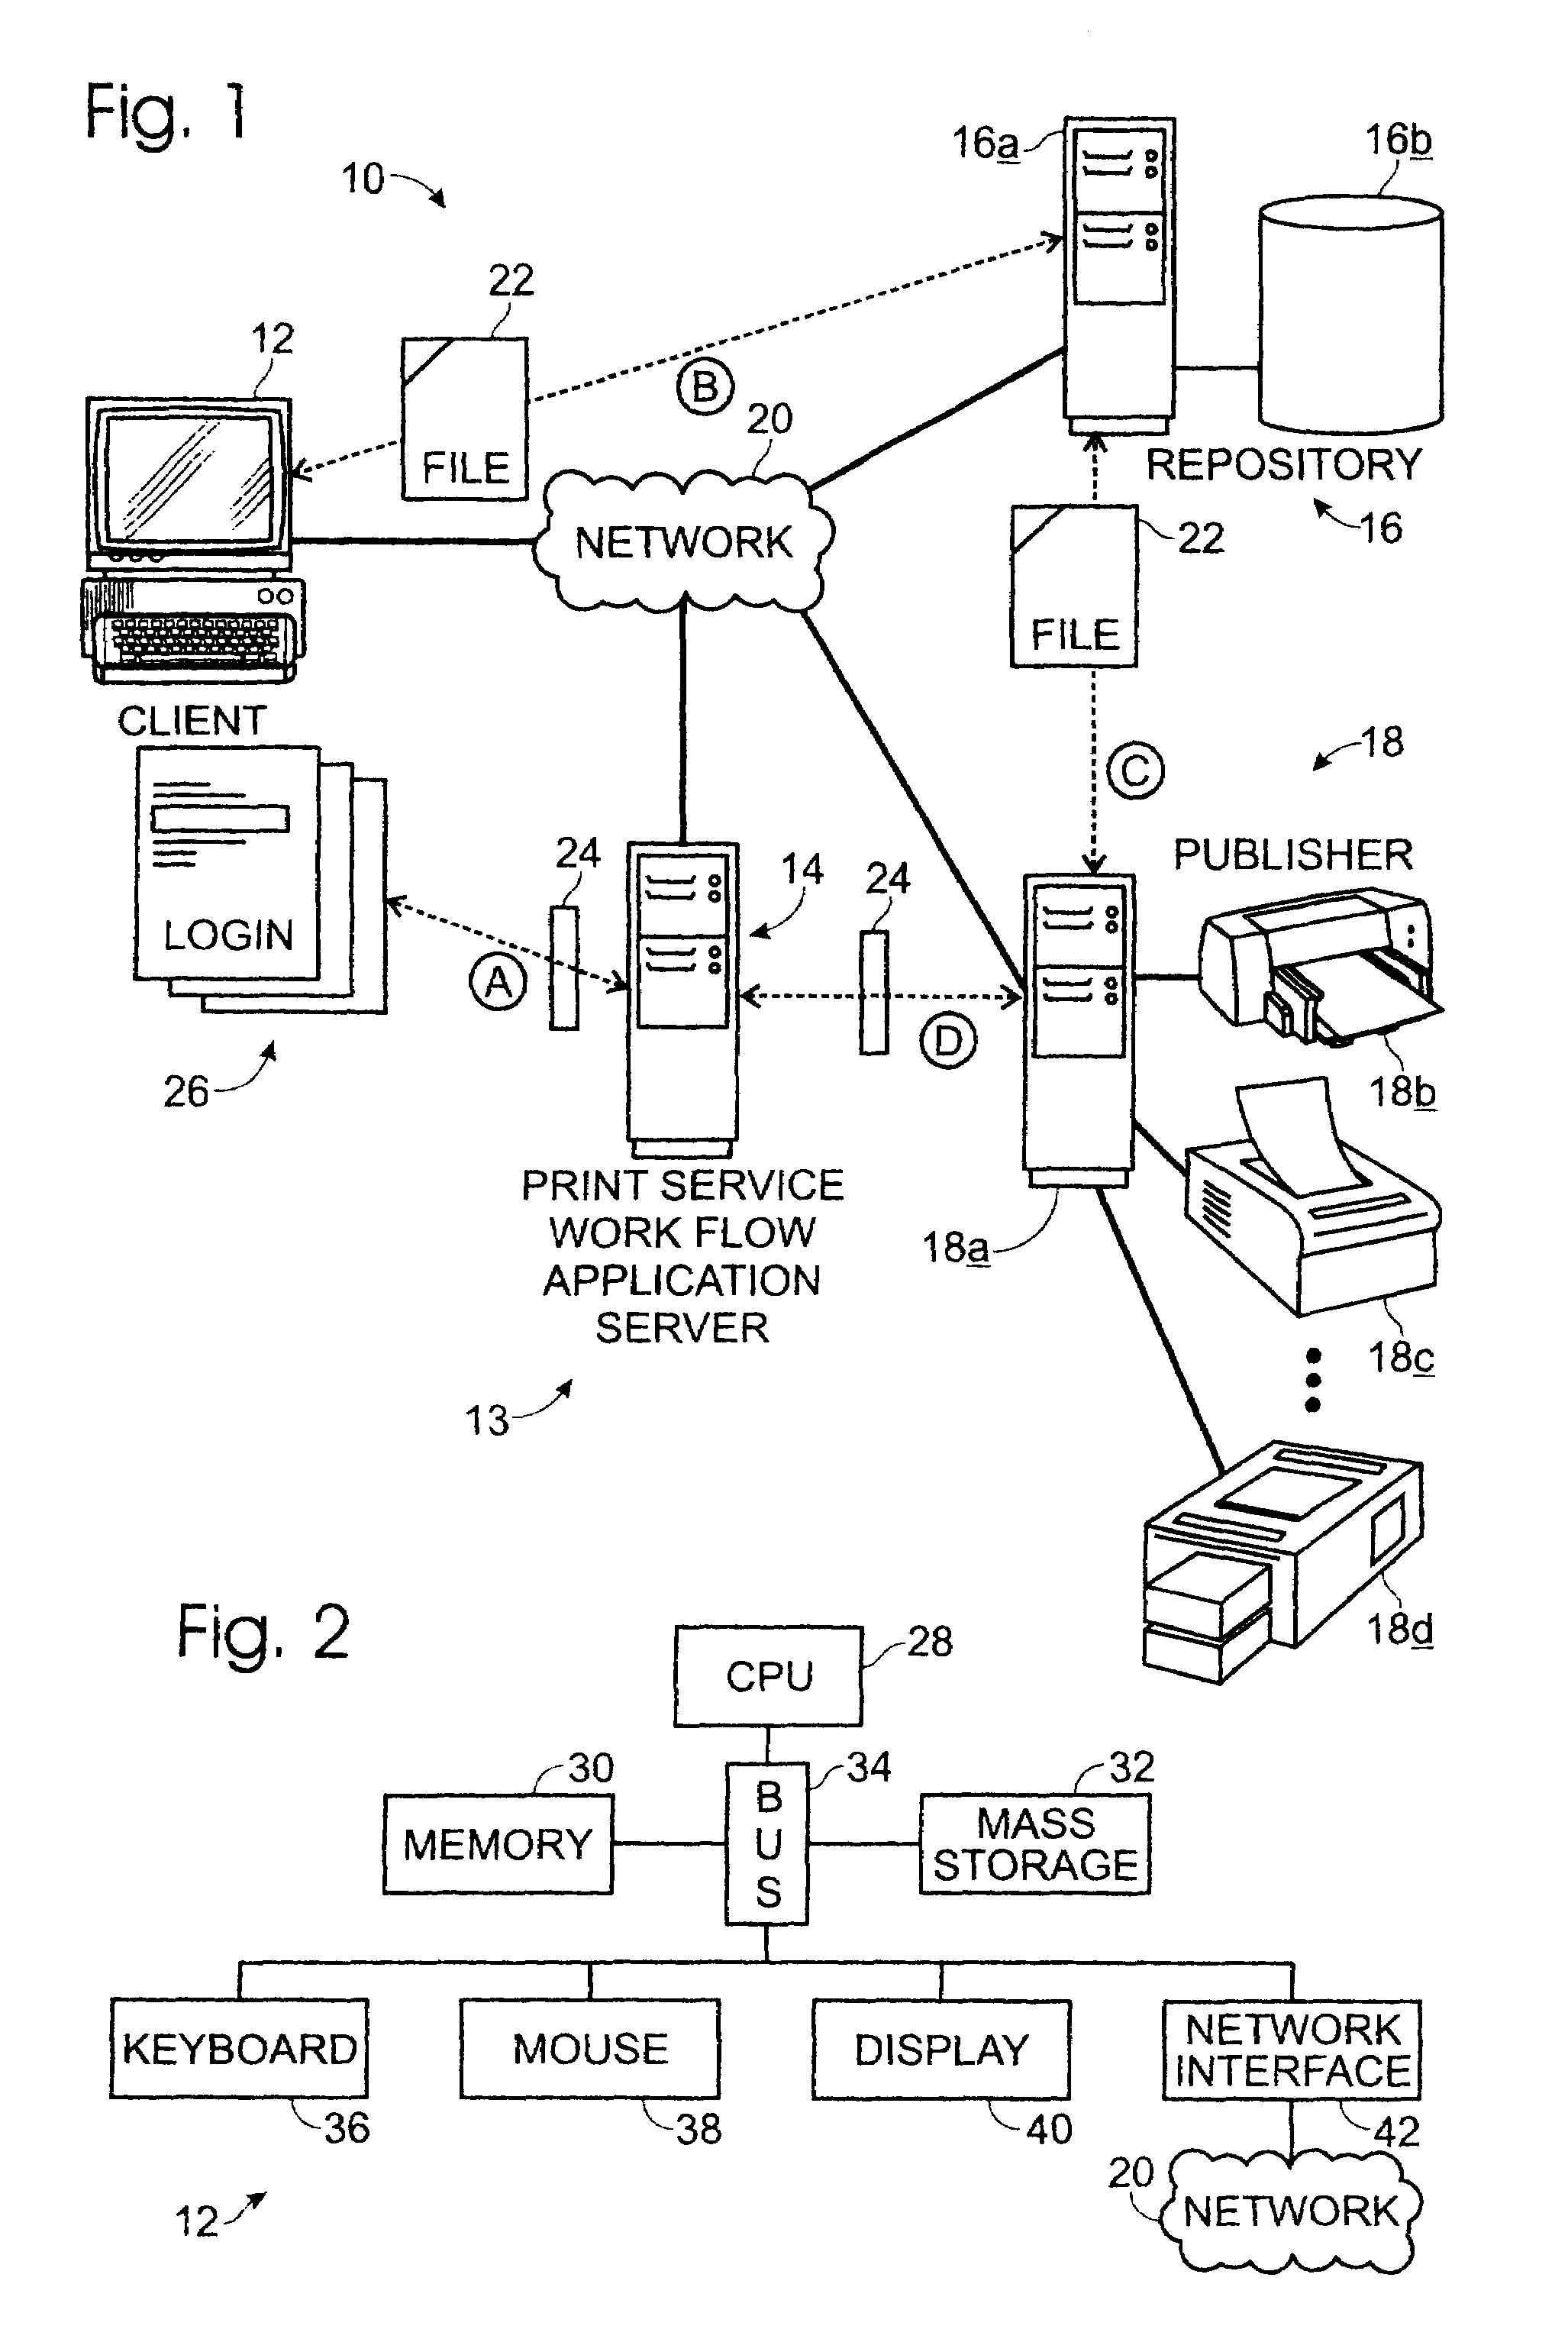 System and method for accessing and using a commercial print service